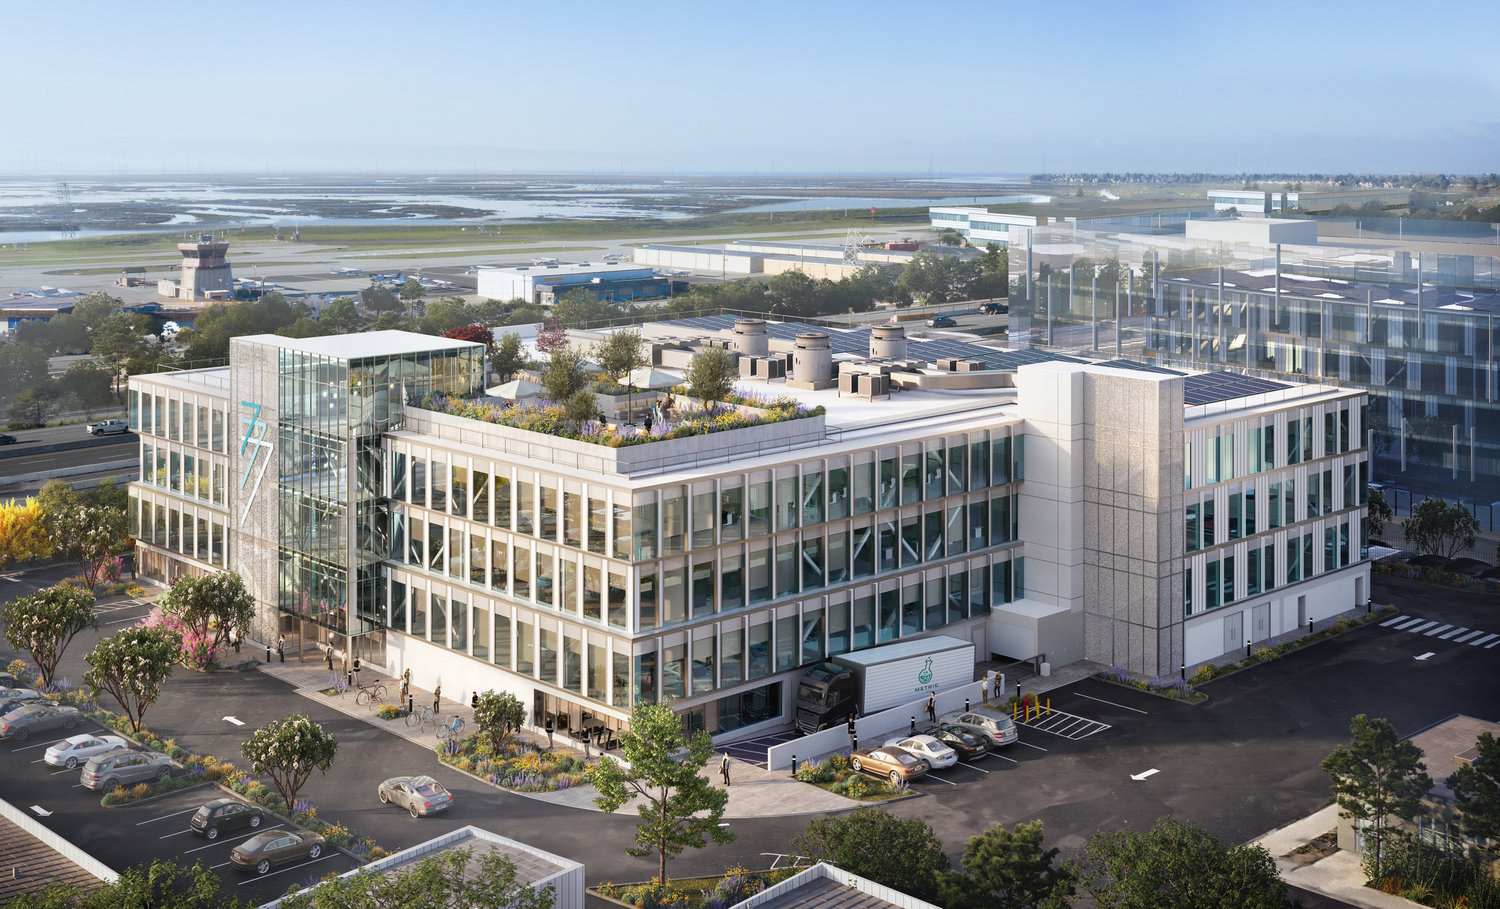 777 Industrial Road aerial view, rendering by Stanton Architecture